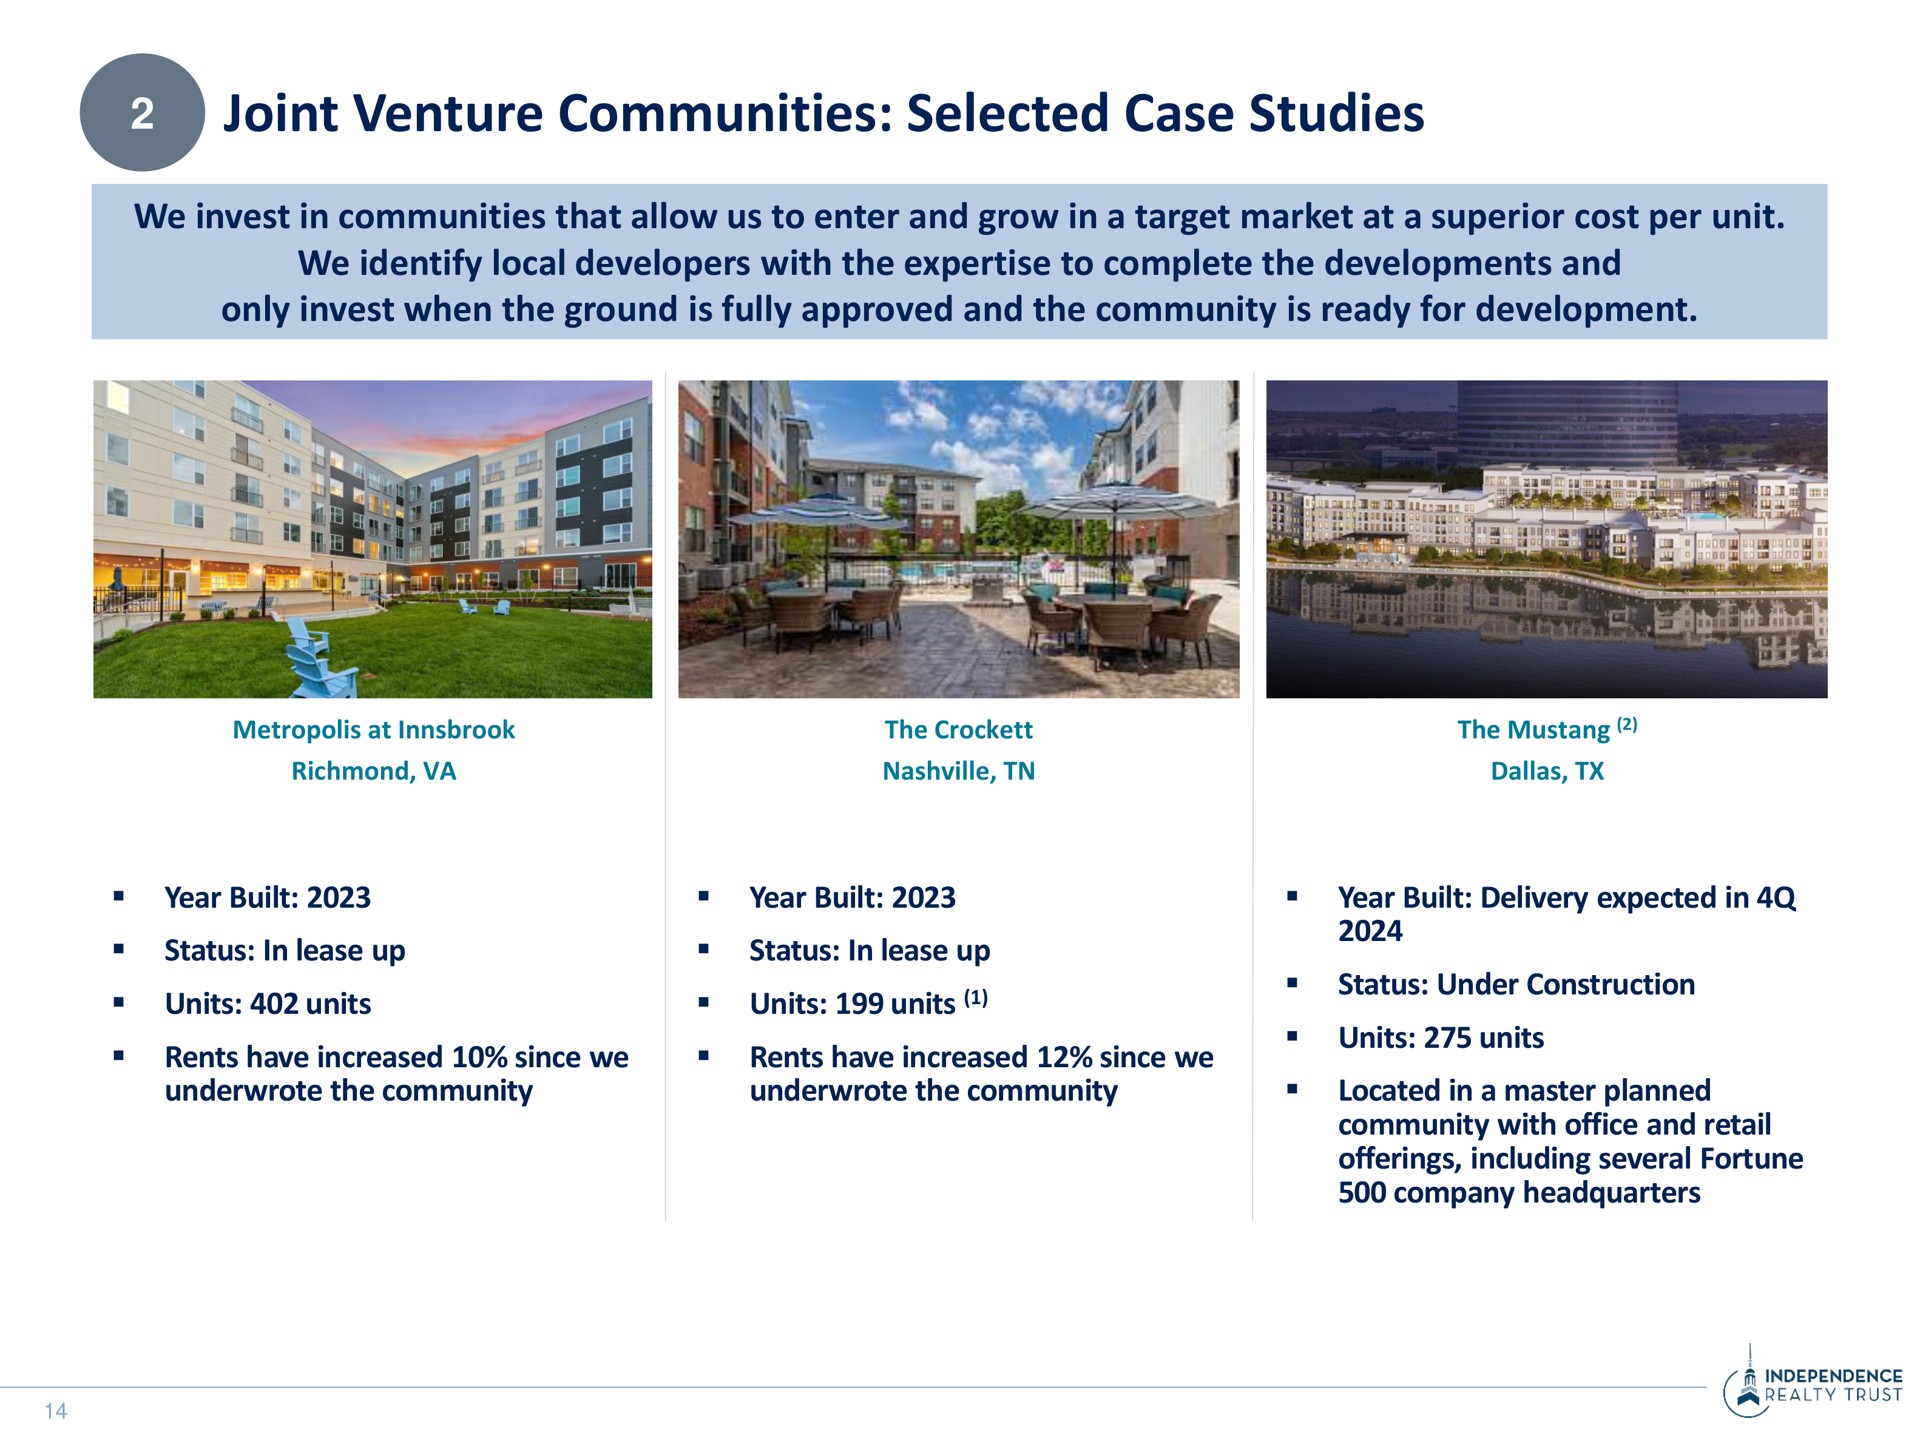 joint venture communities selected case studies we invest in communities that allow us to enter and grow in a target market at a superior cost per unit we identify local developers with the to complete the developments and only invest when the ground is fully approved and the community is ready for development | Independence Realty Trust